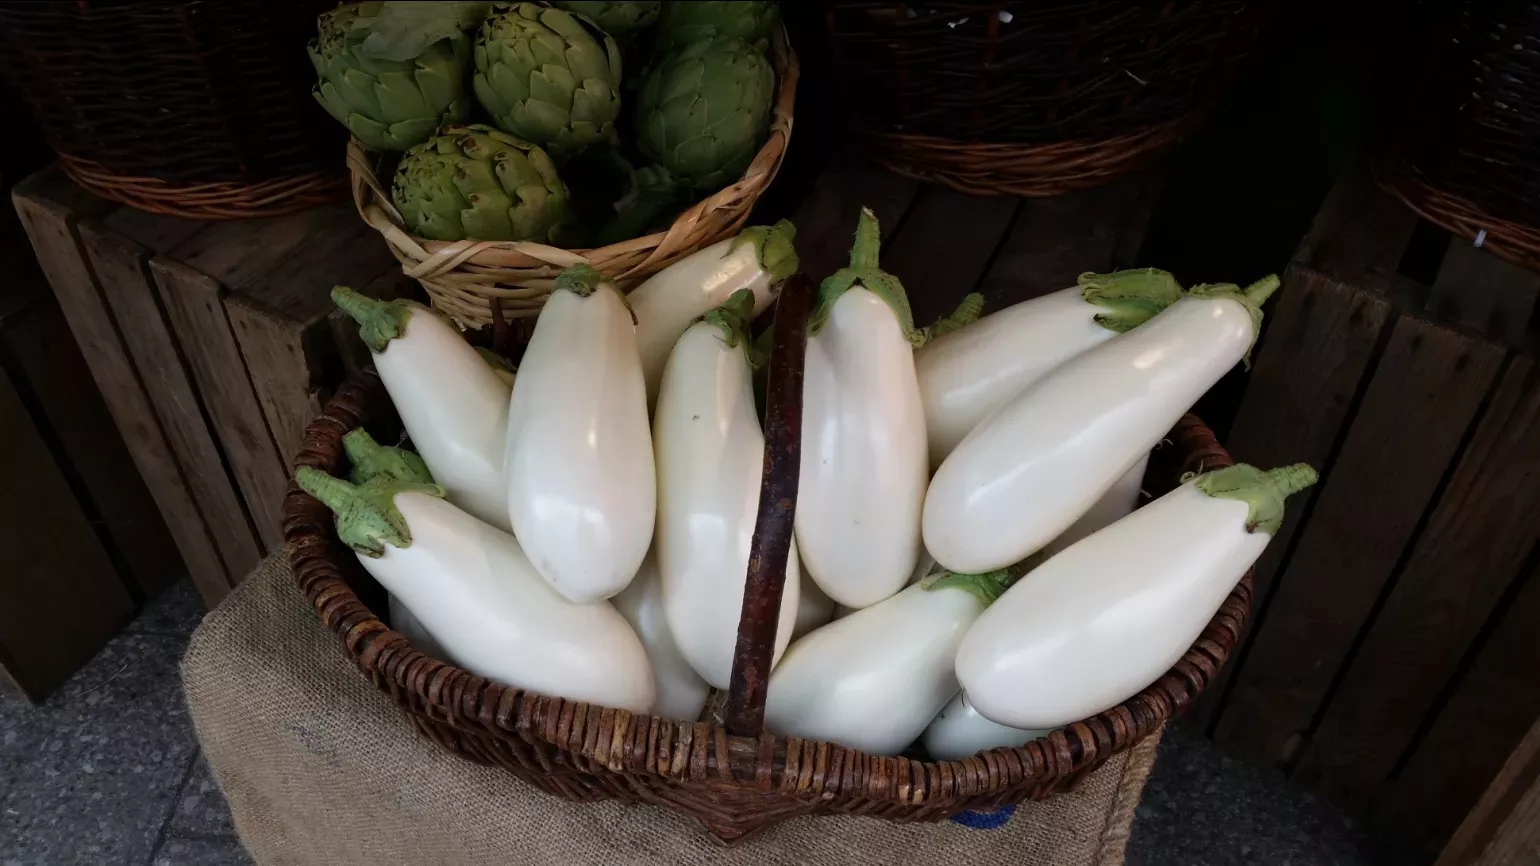 Several white aubergine fruit in a basket